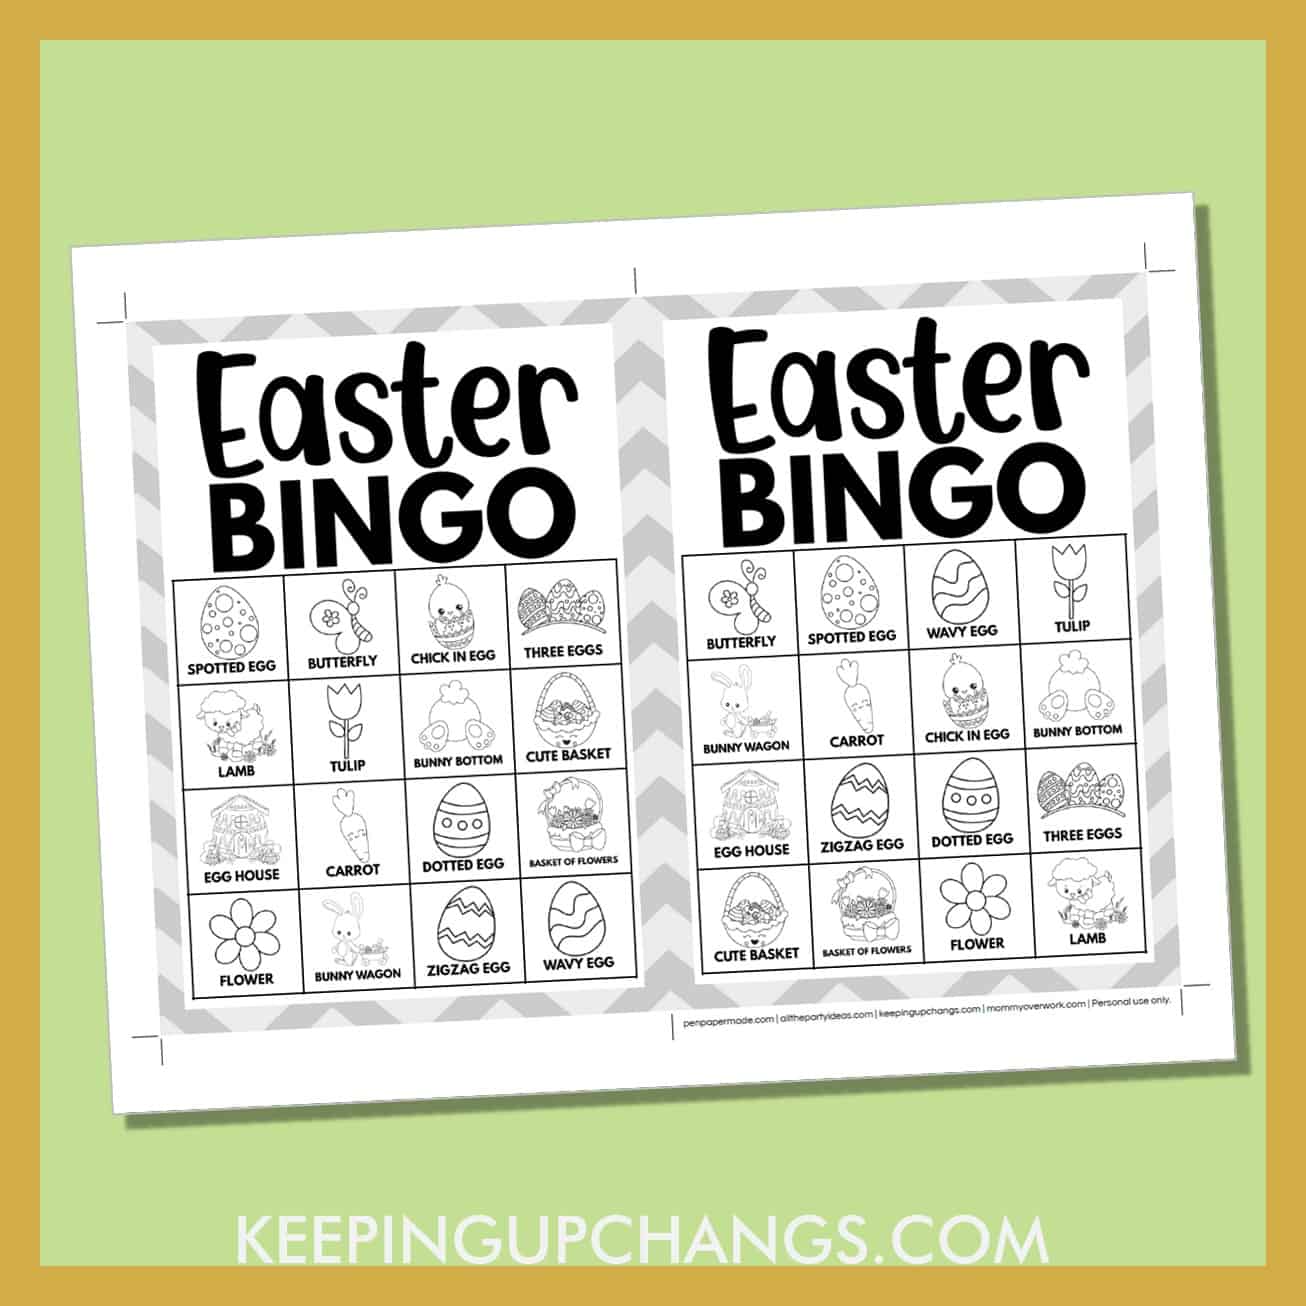 free easter bingo card 4x4 5x7 black white coloring game boards with images and text words.